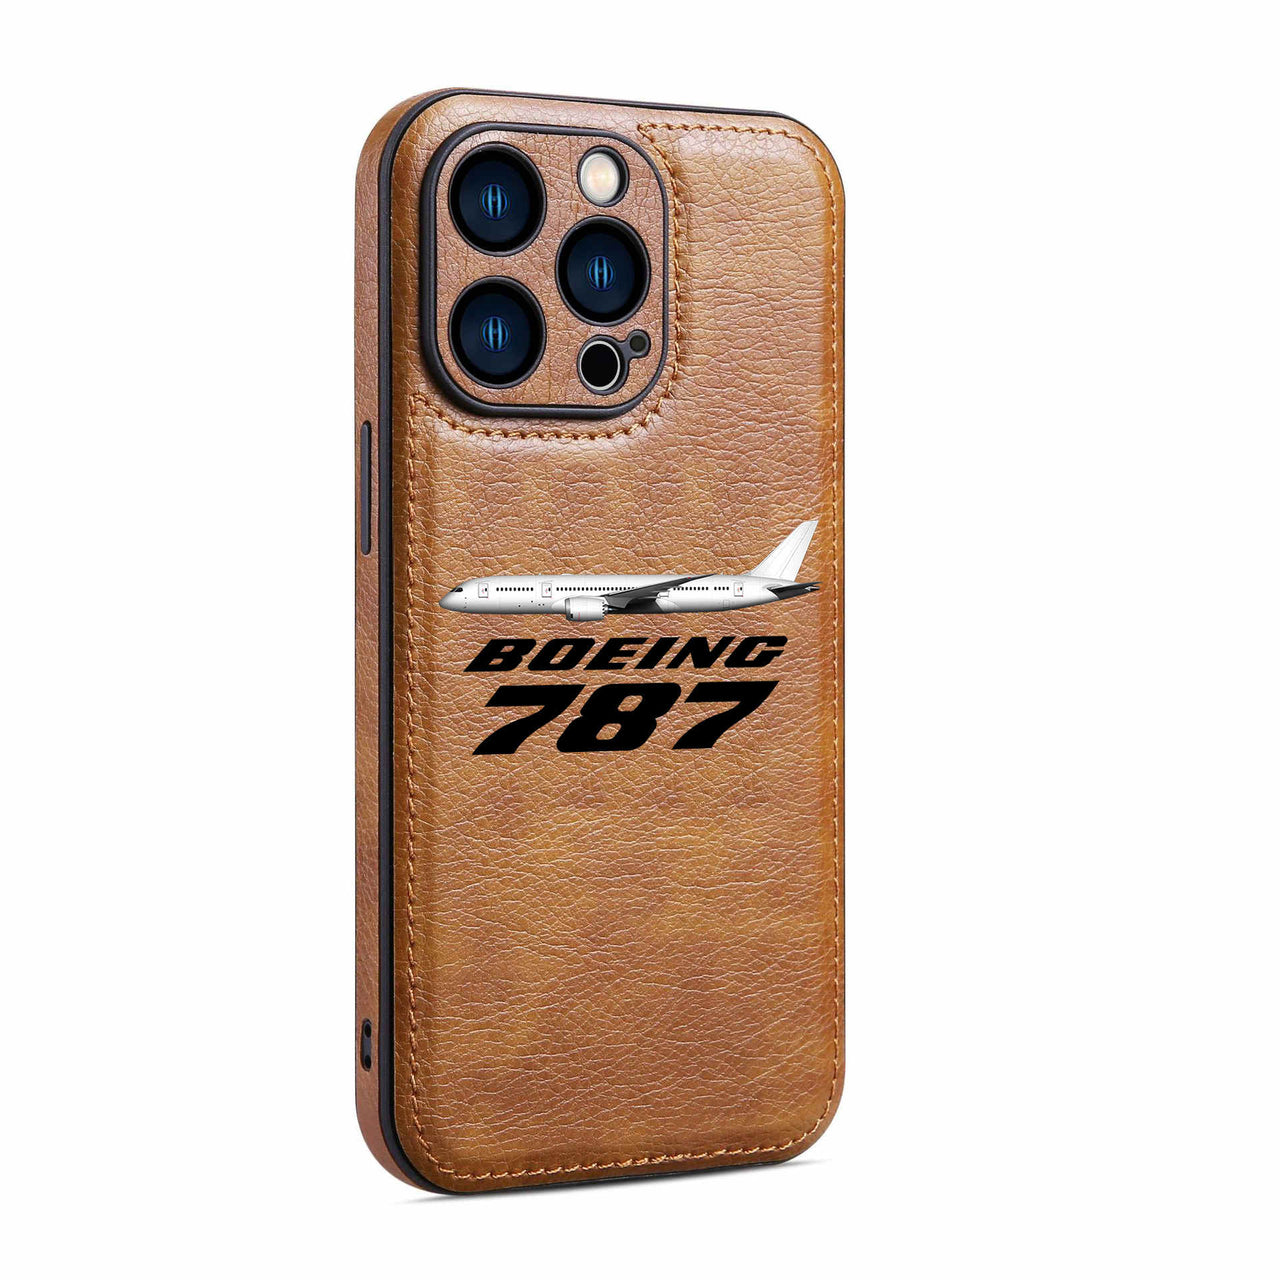 The Boeing 787 Designed Leather iPhone Cases